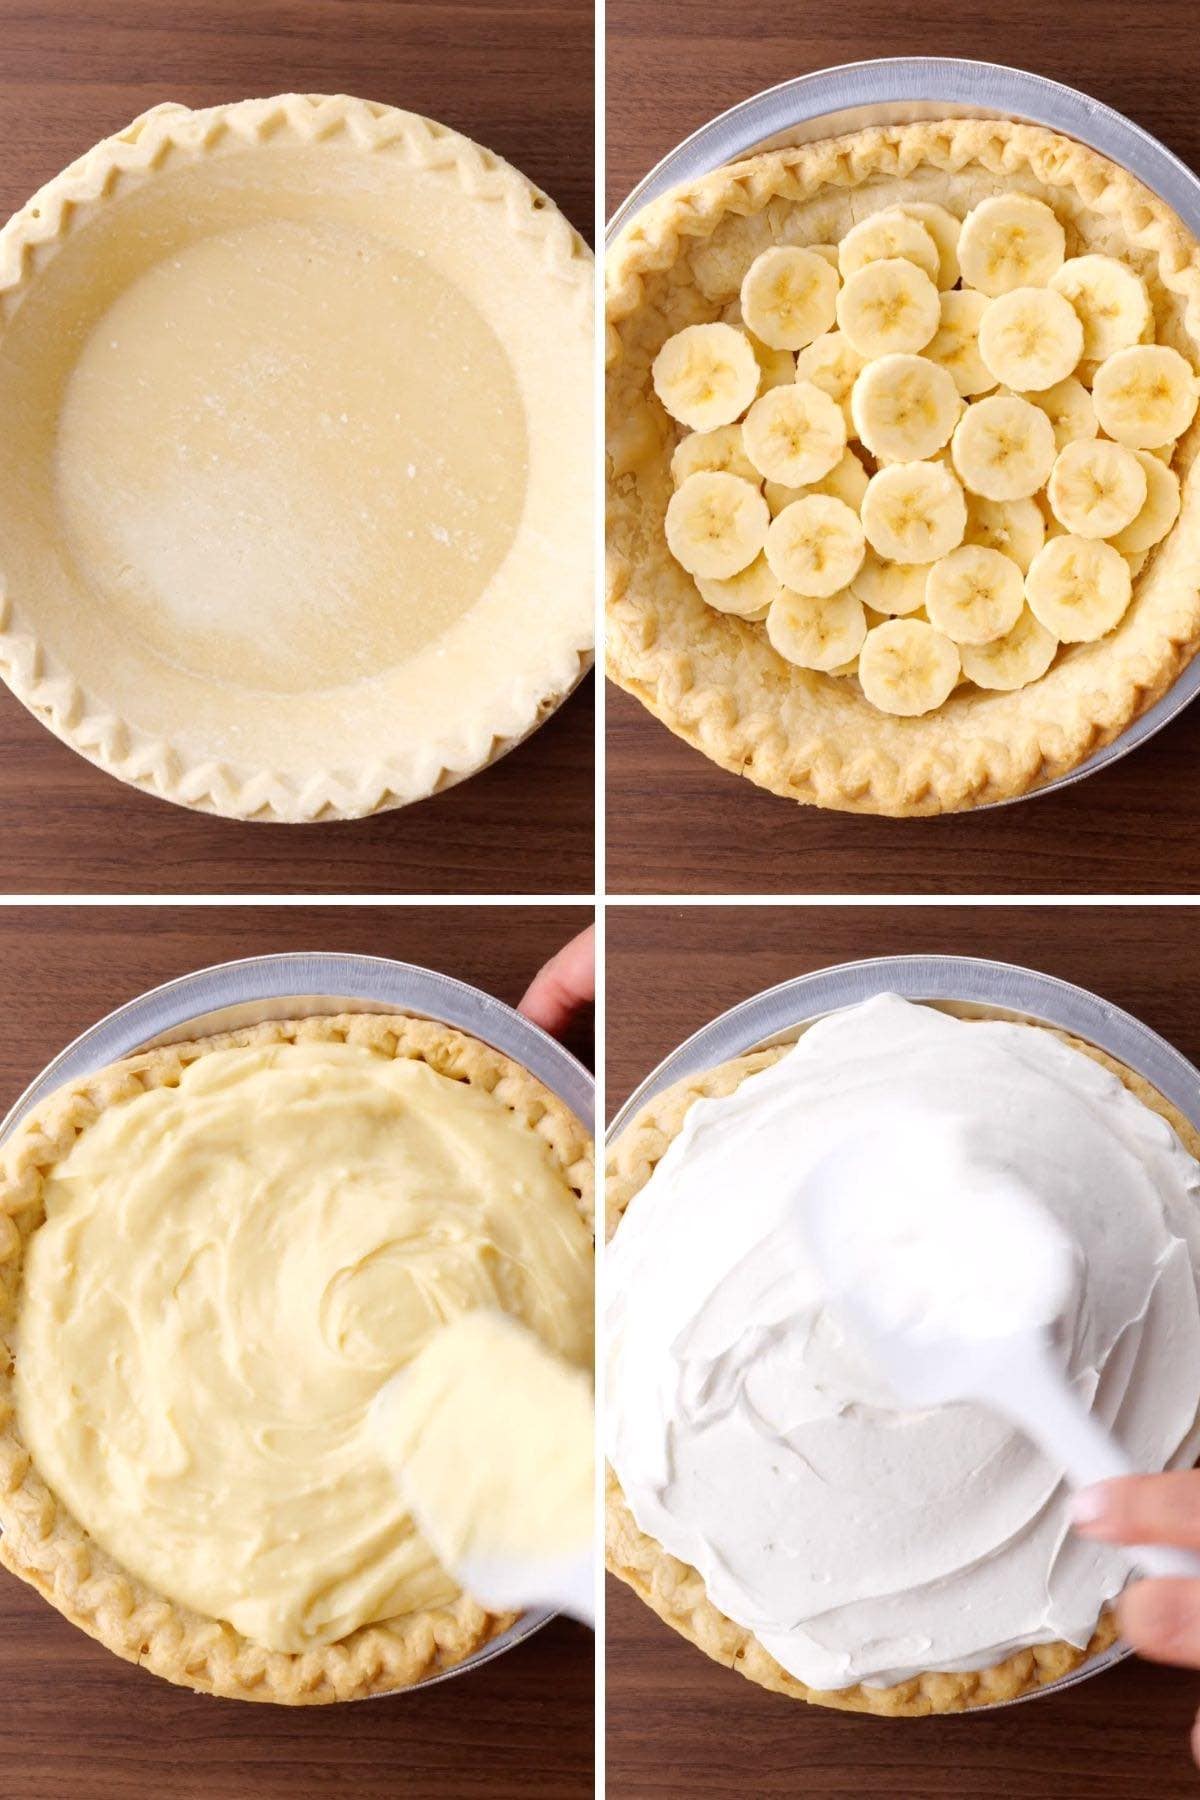 Banana Cream Pie Collage of assembly steps